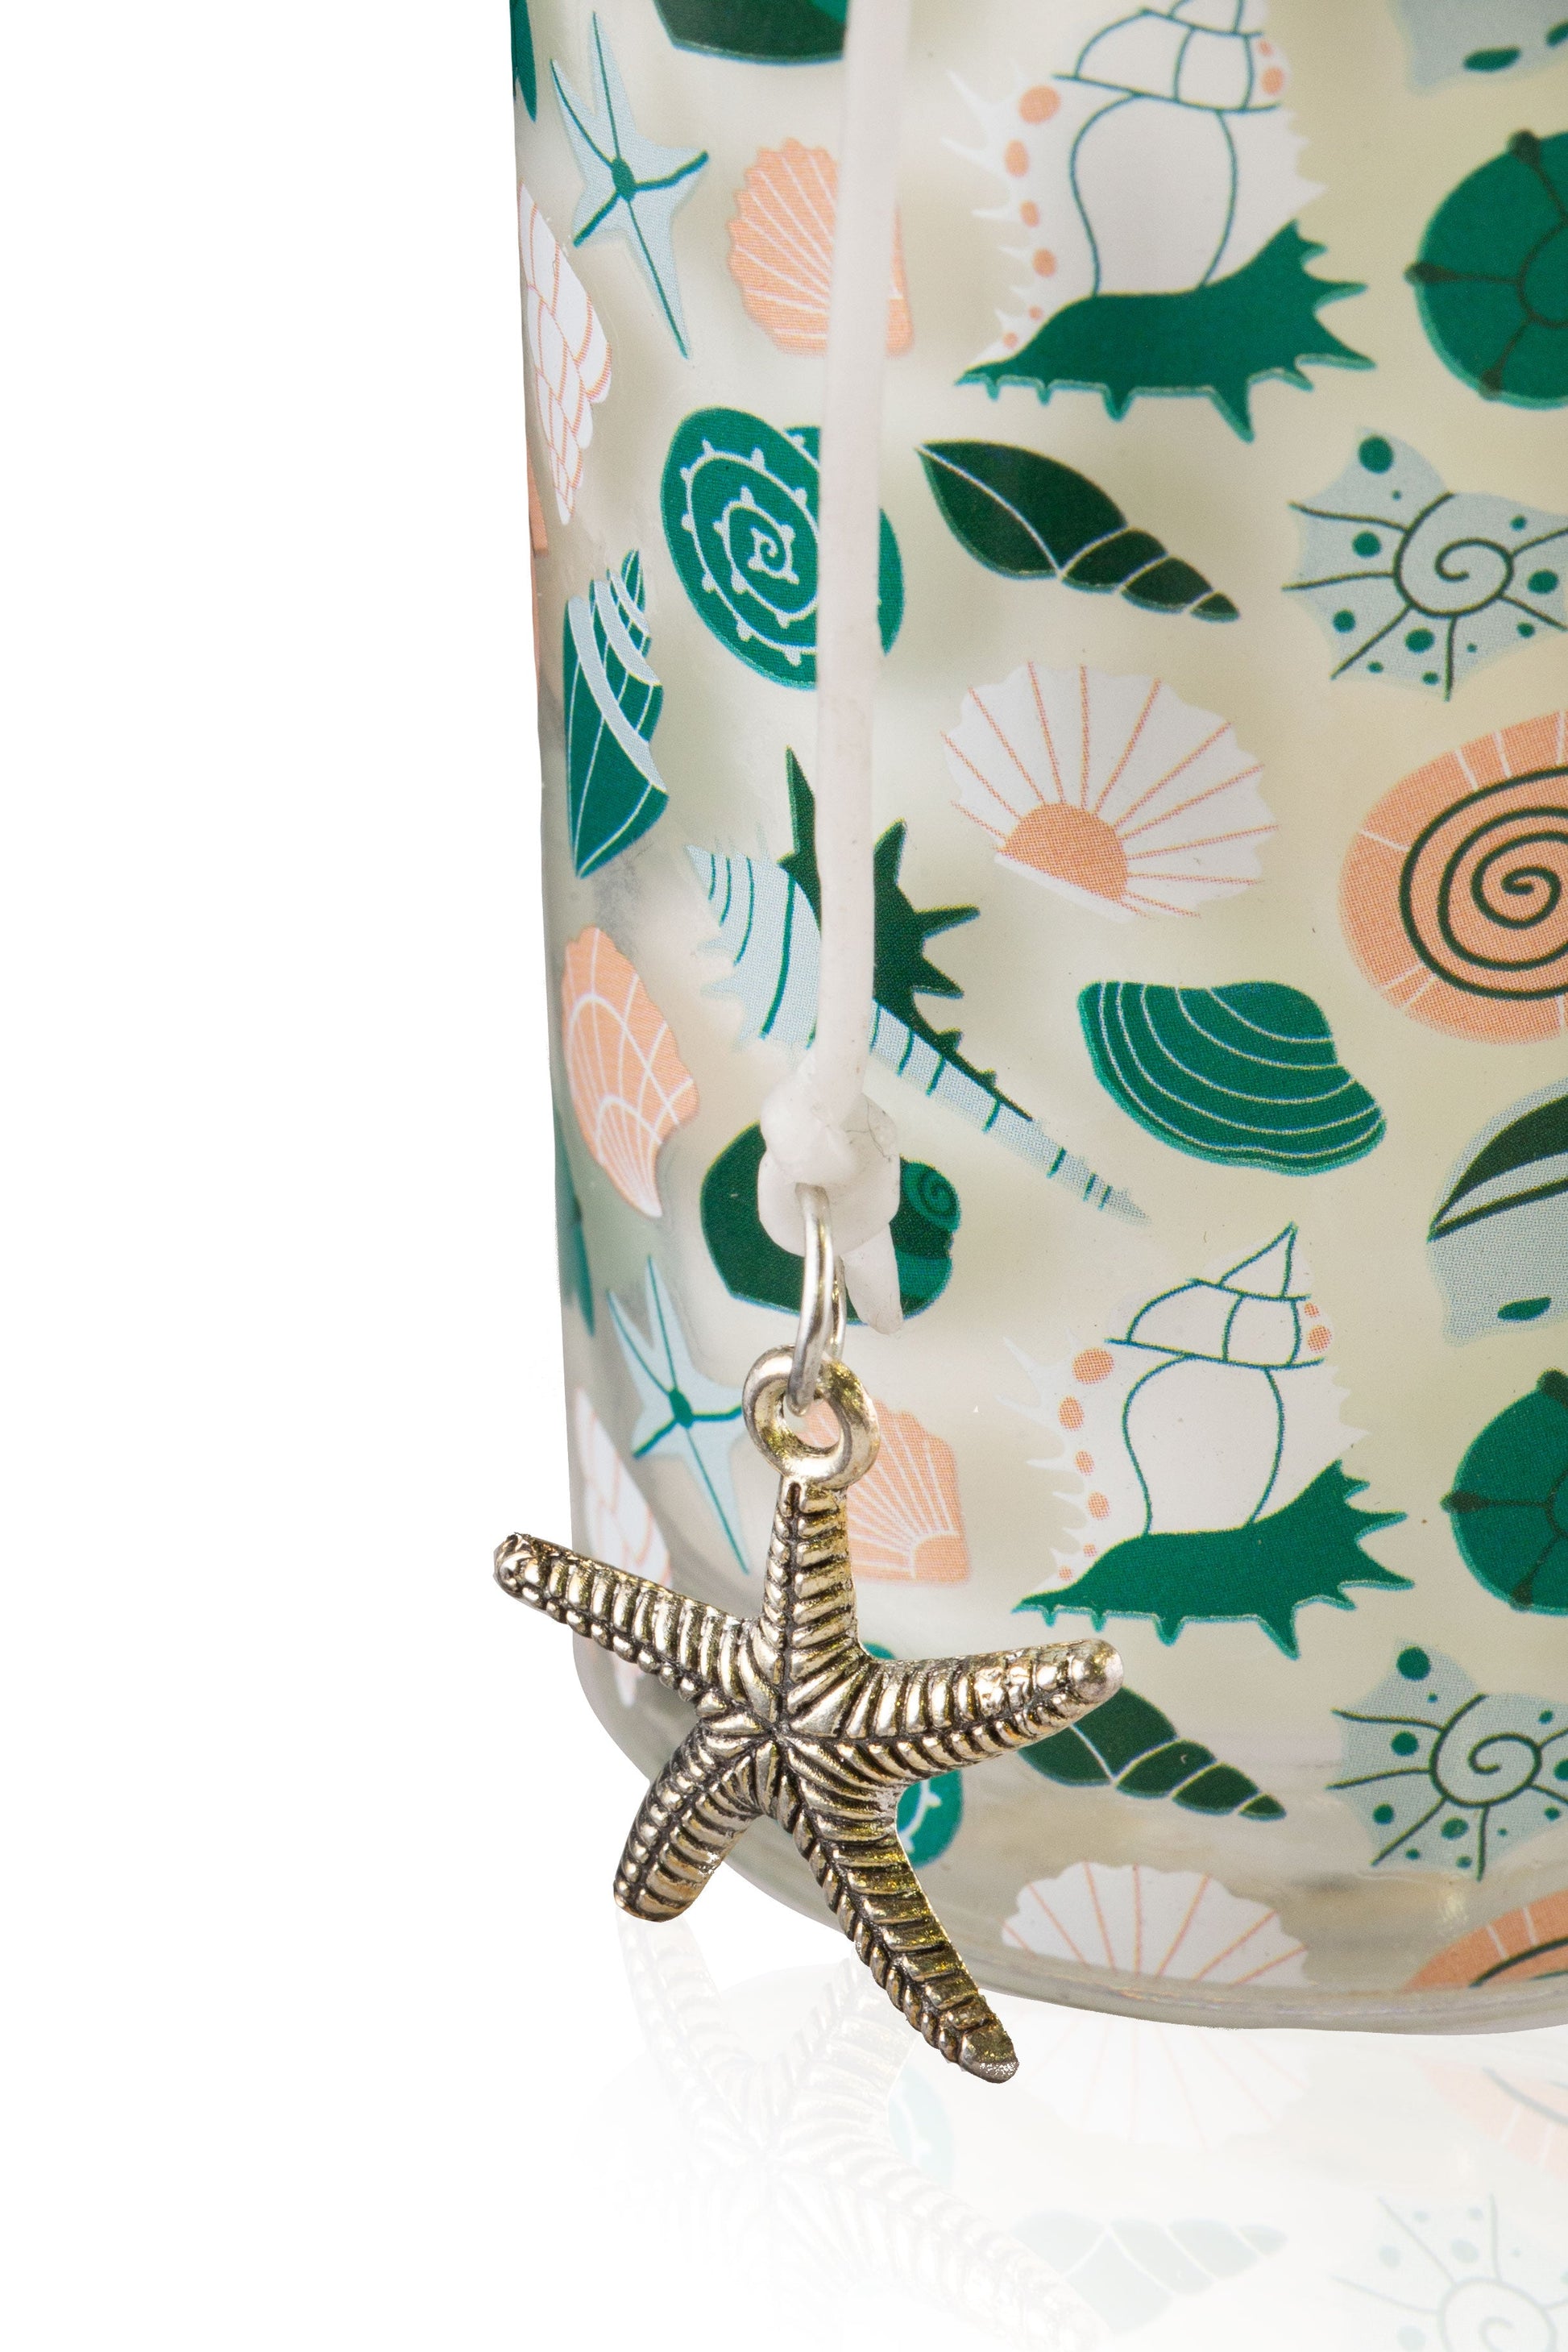 Pier 1 Sea Air Charm Jar 6.5oz Filled Candle - The Home Resolution